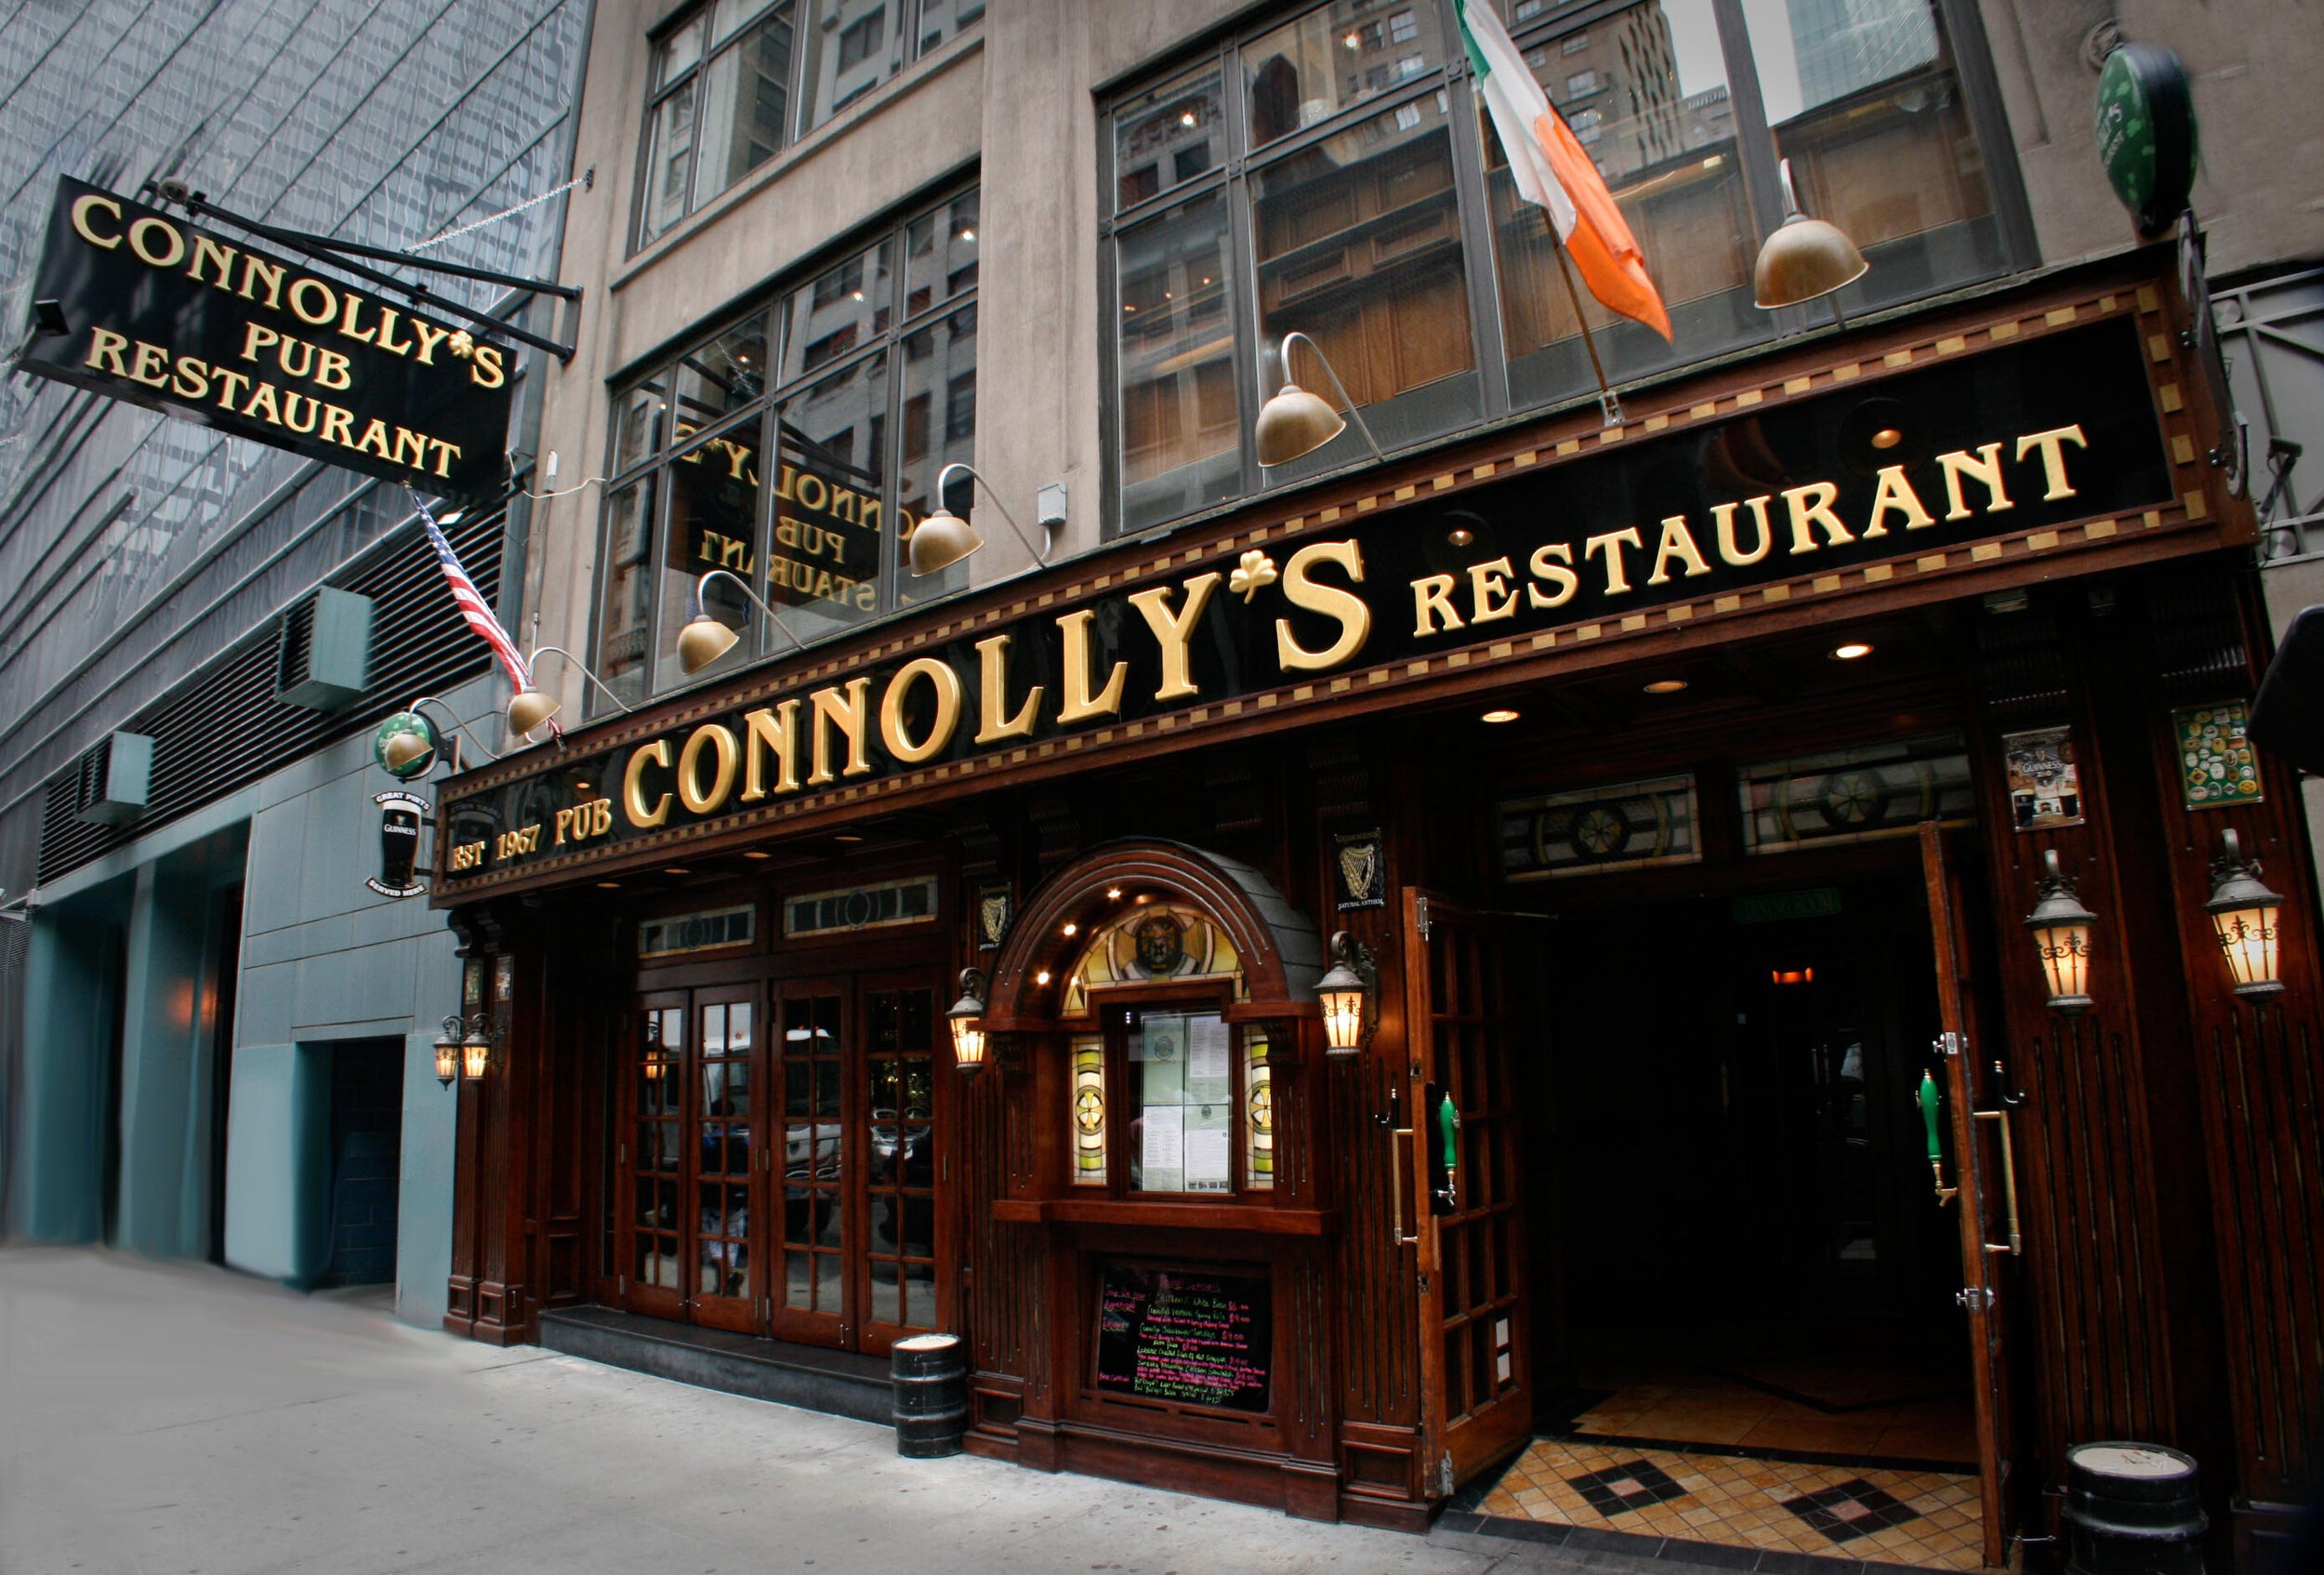 Exterior of Connolly's
Best Irish pubs in New York City